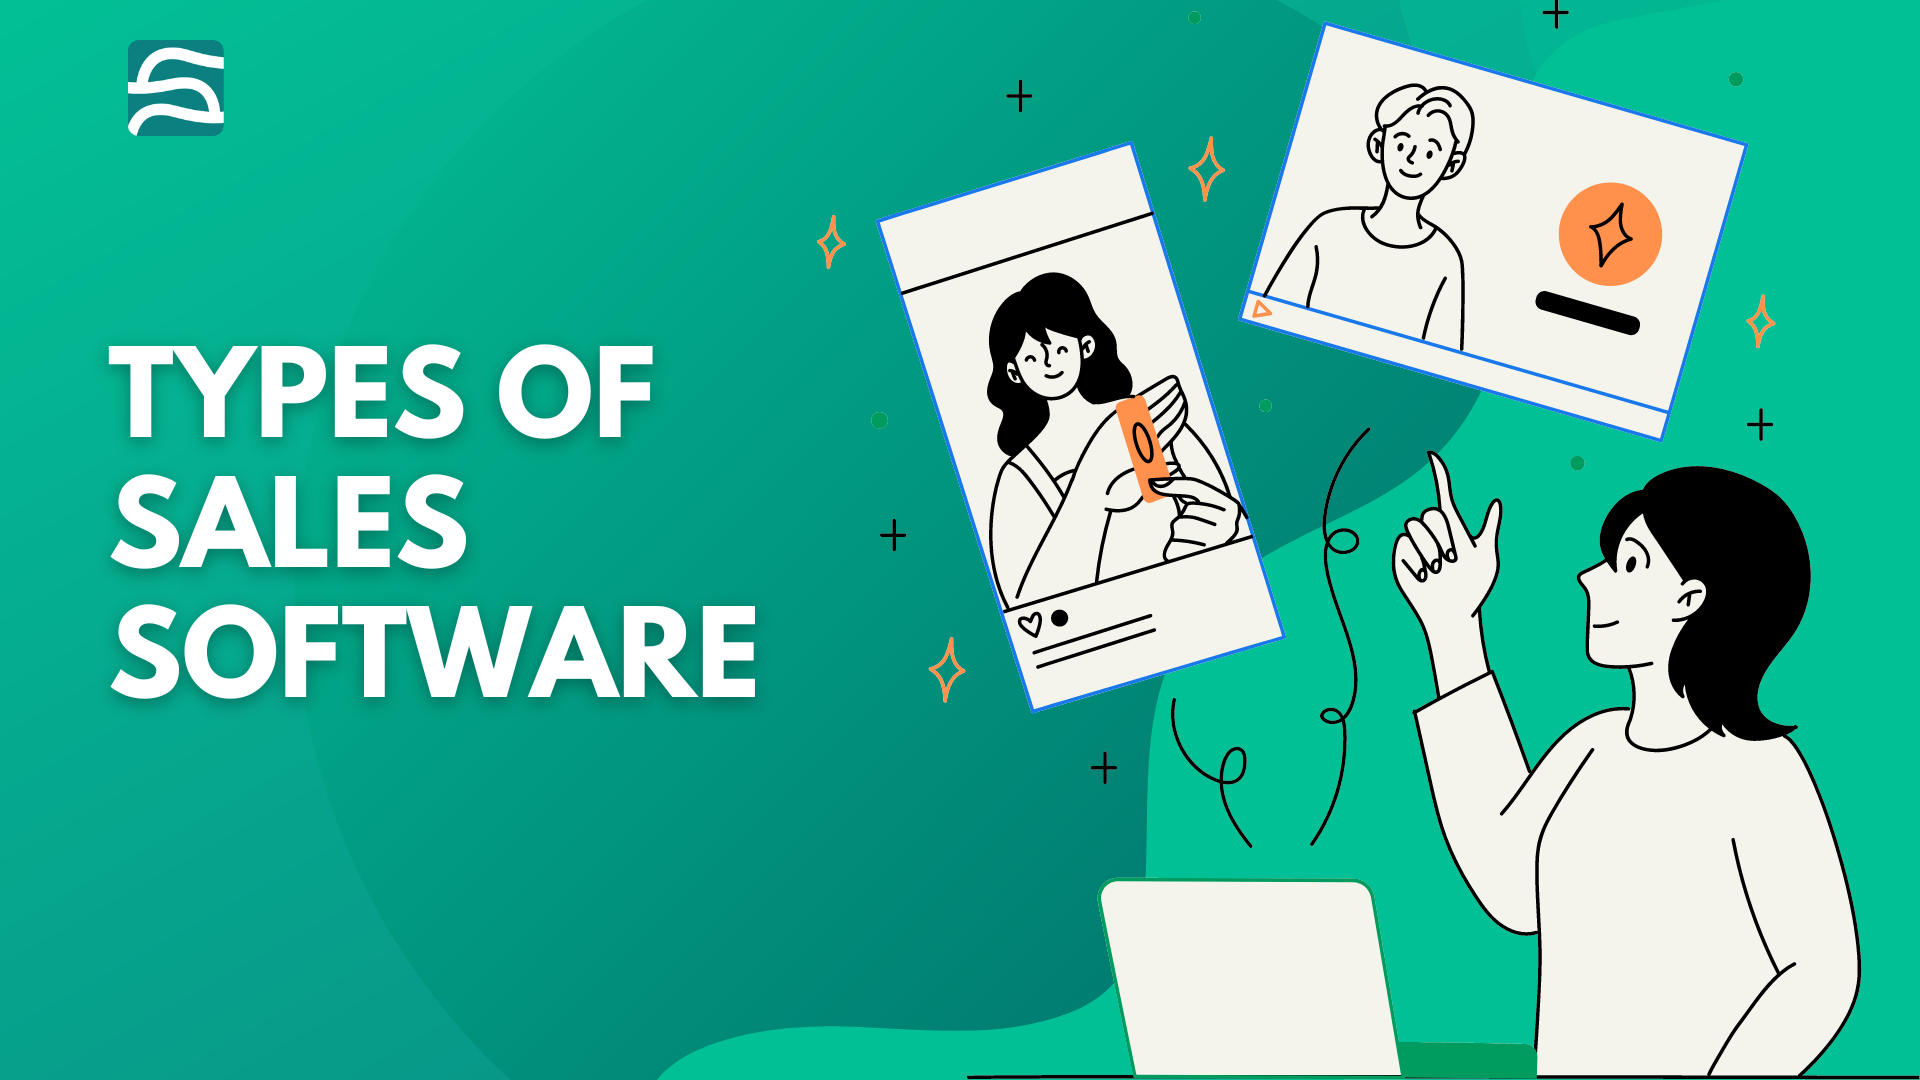 sales force: Types of Sales Software